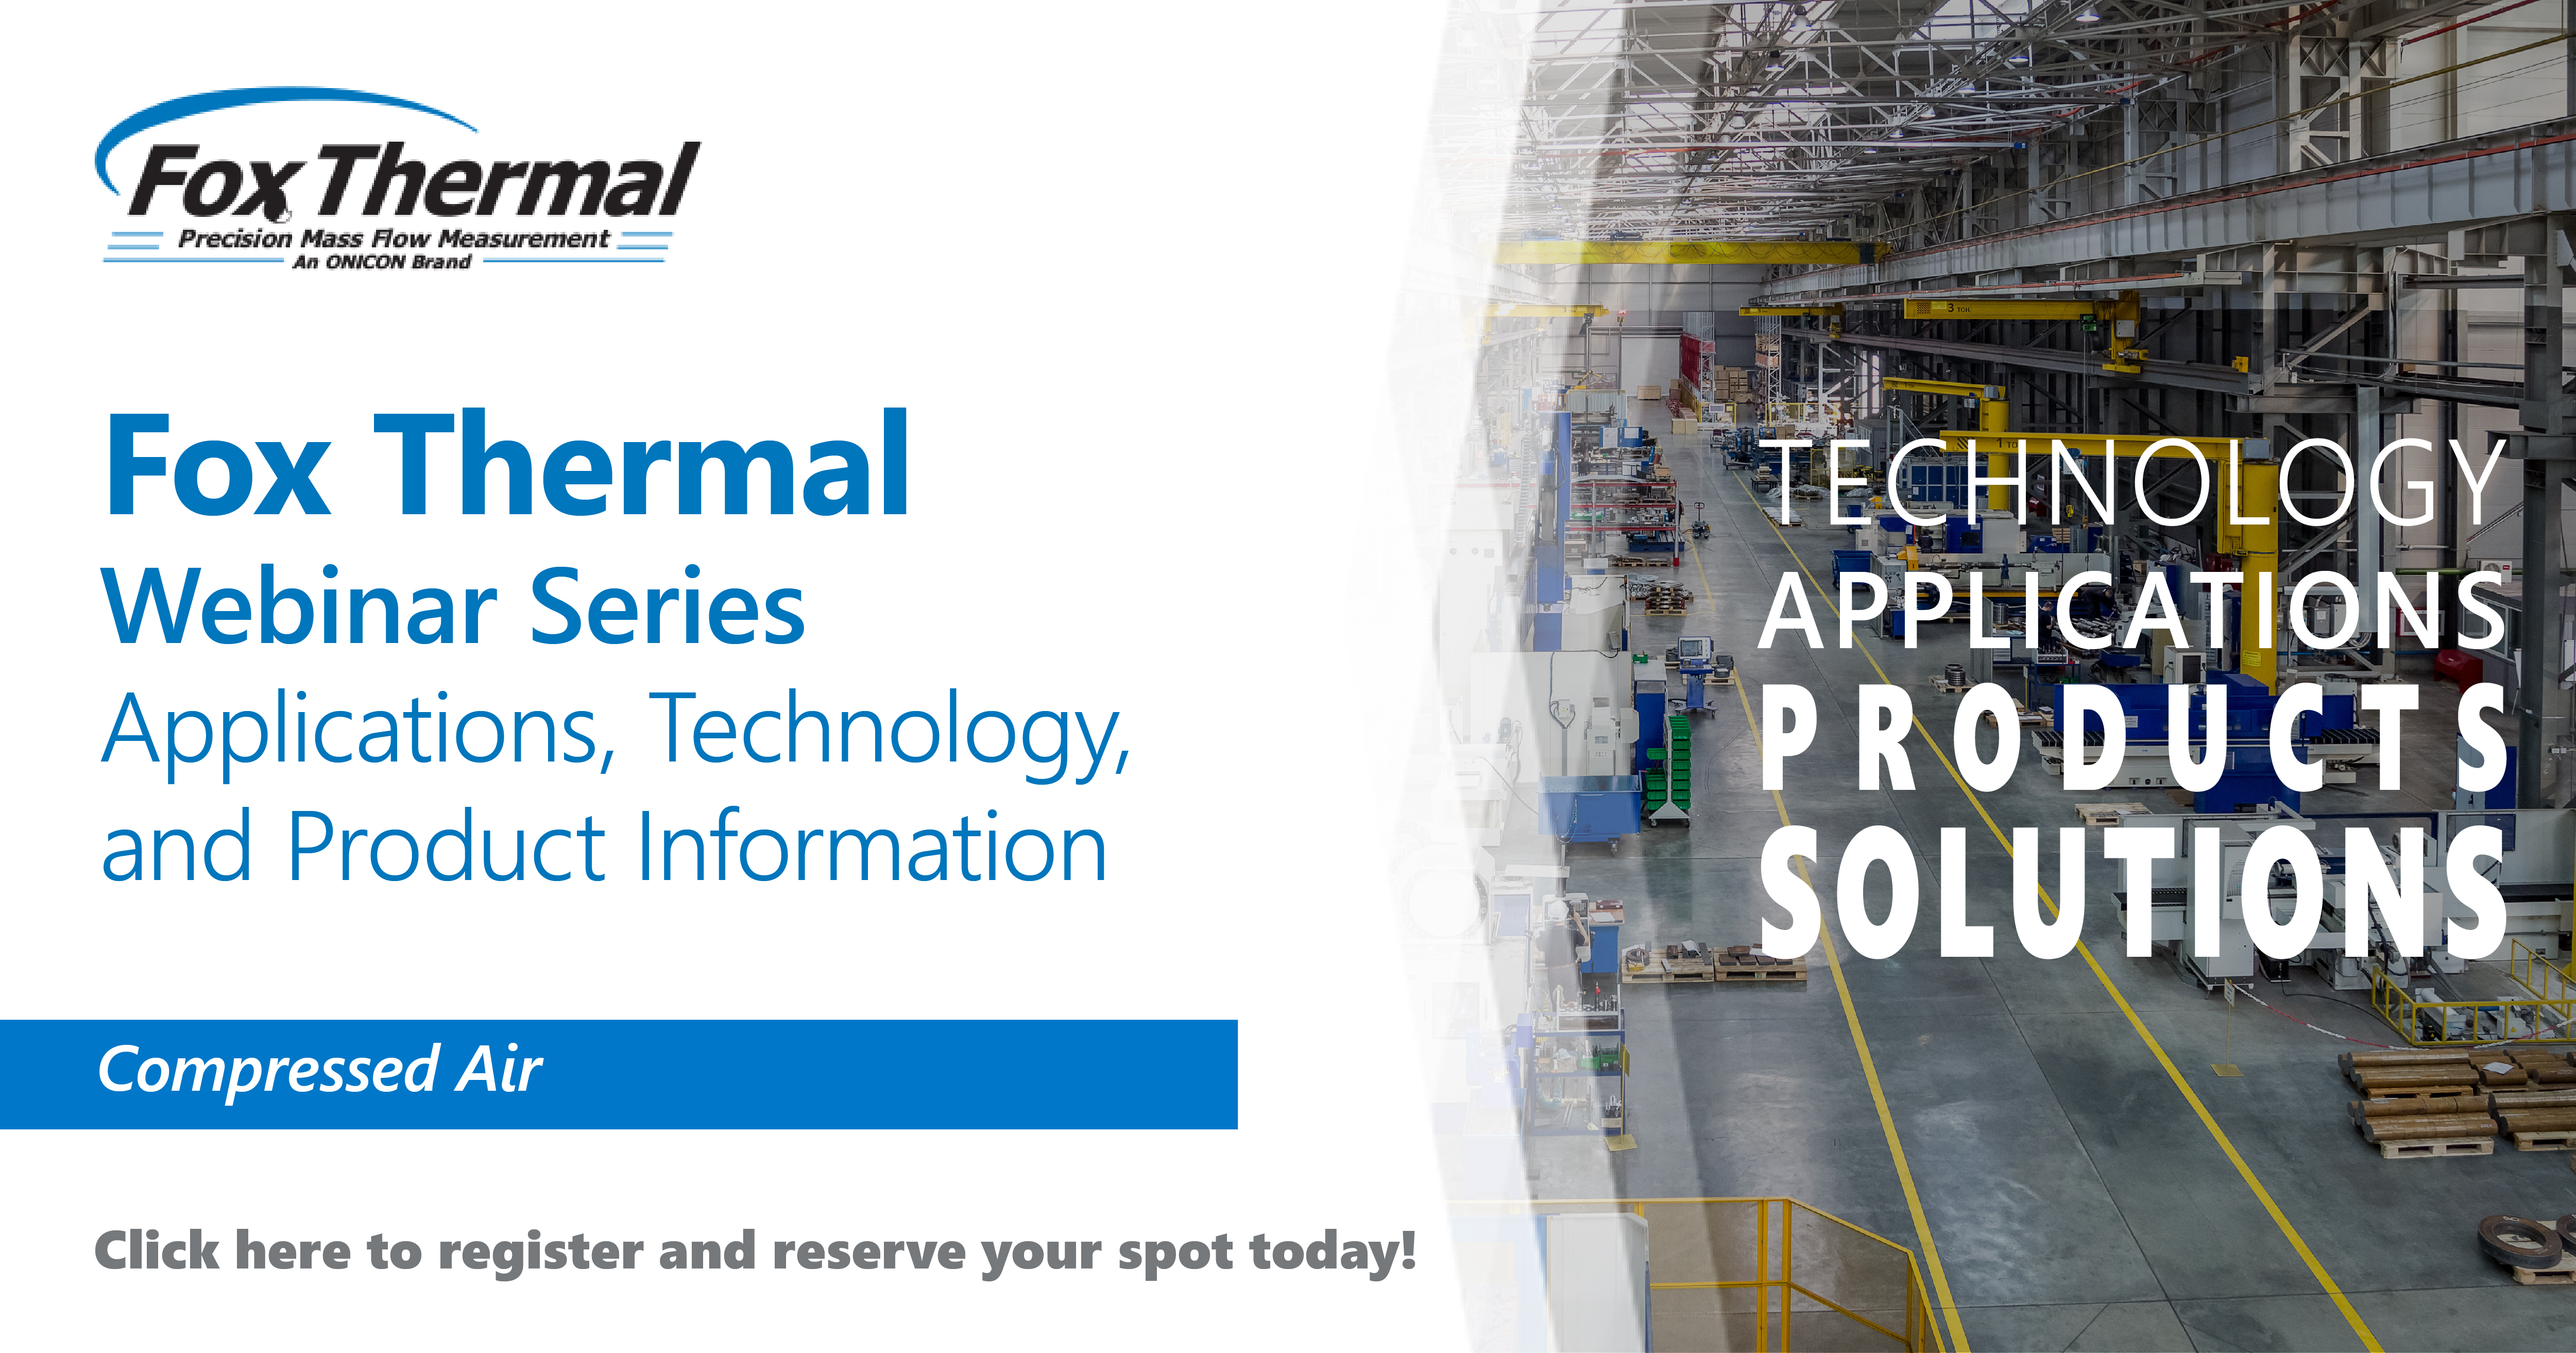 Register for this Compressed Air webinar from Fox Thermal